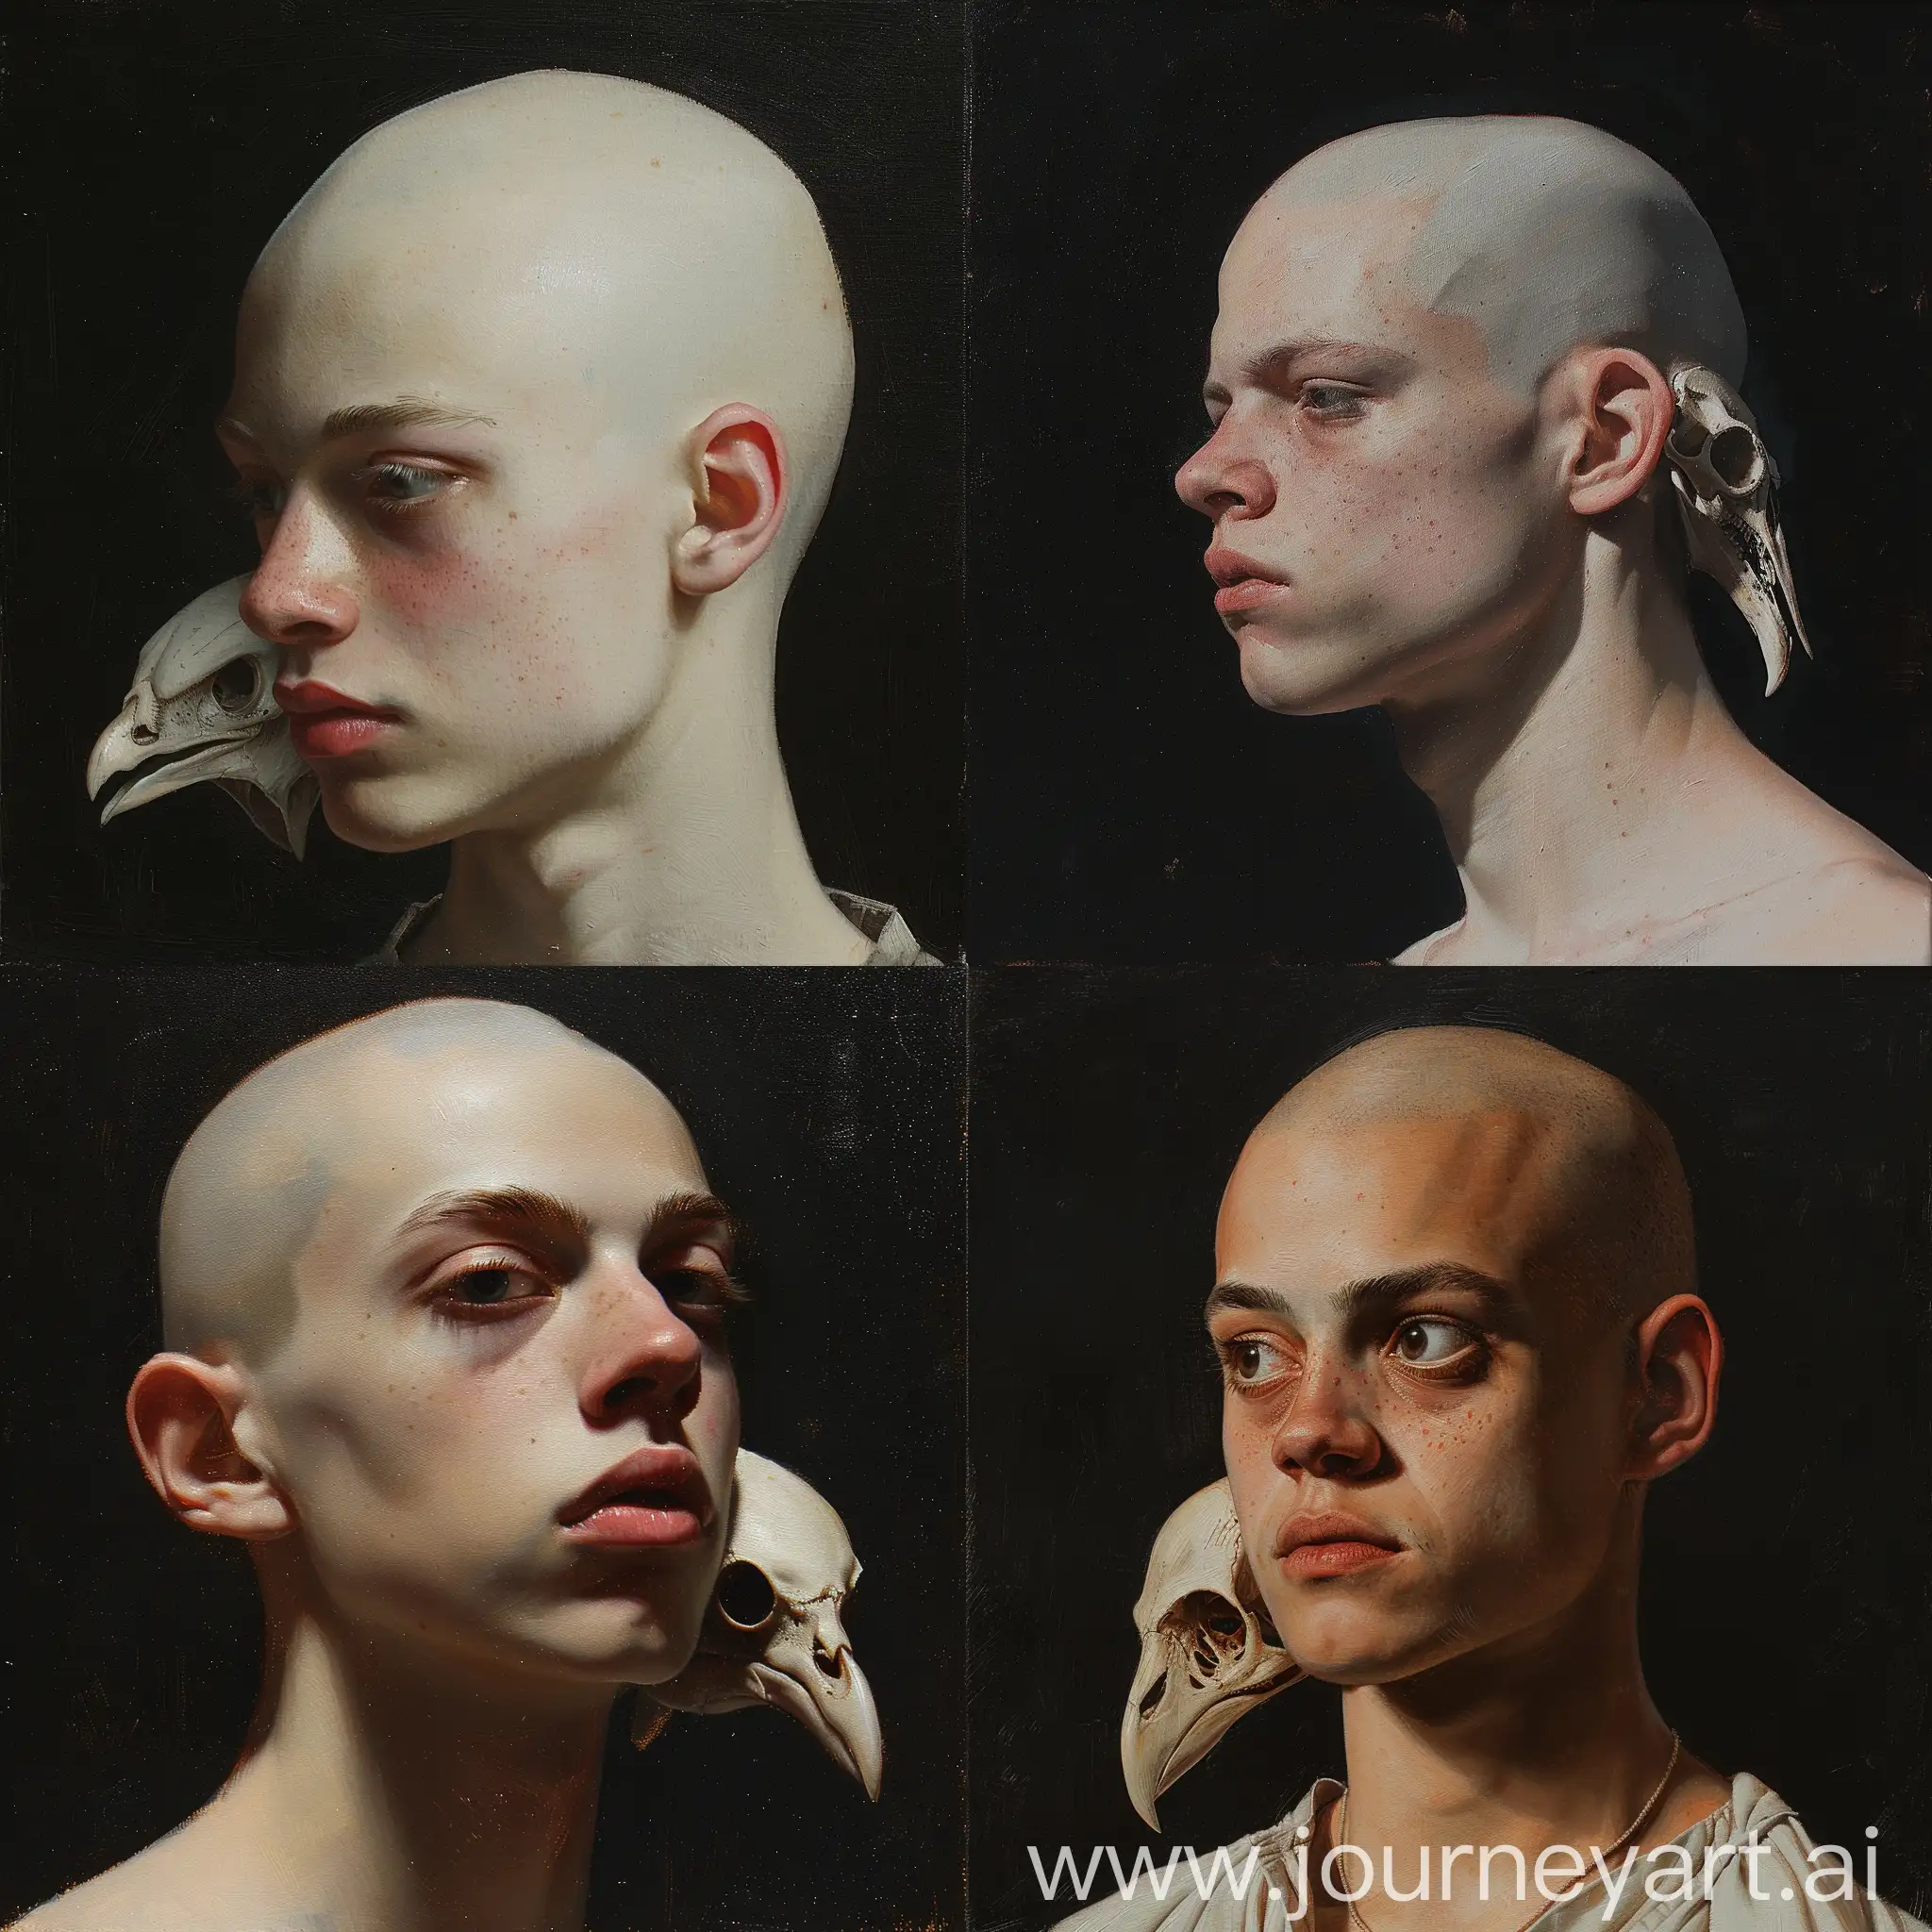 Oil sketch of a bald young man with bird skull, wlop John singer Sargent, jeremy lipkin and rob rey, range murata jeremy lipking, John singer Sargent, black background, jeremy lipkin, lensculture portrait awards, casey baugh and james jean, detailed realism in painting, award-winning portrait, amazingly detailed oil painting